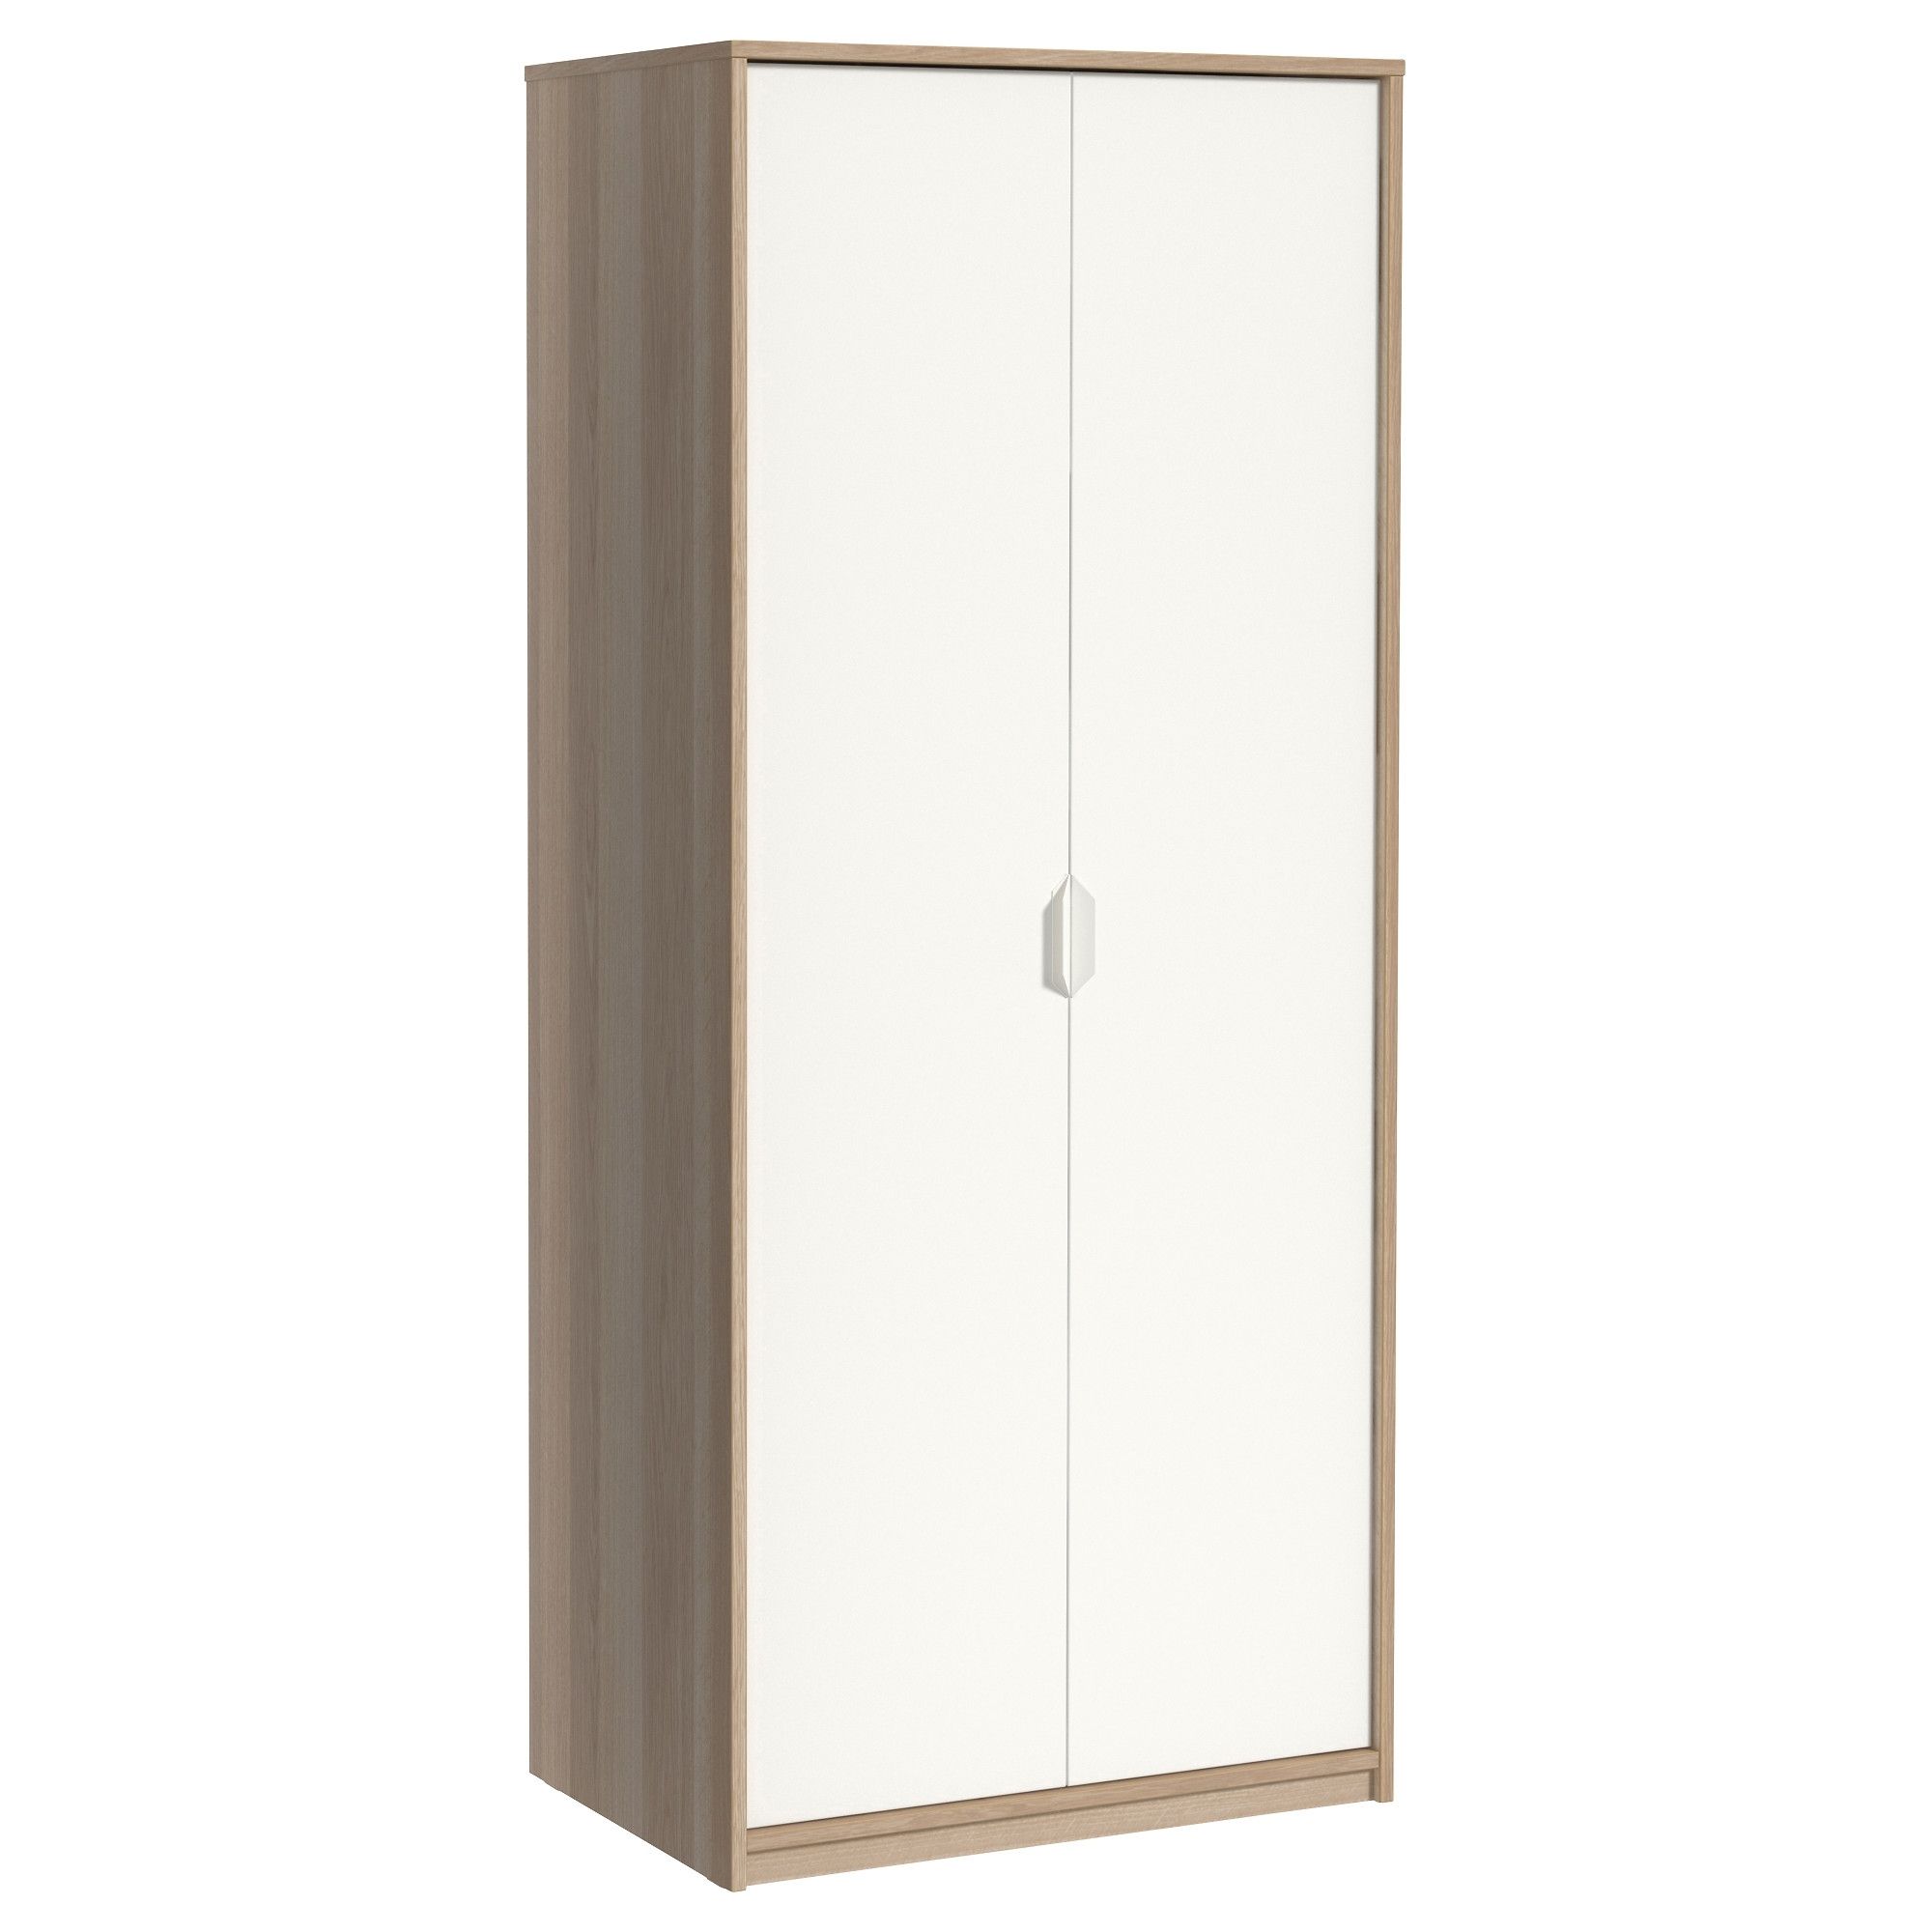 Most Recent Oak And White Wardrobes Within Askvoll Wardrobe – Ikea (View 1 of 15)